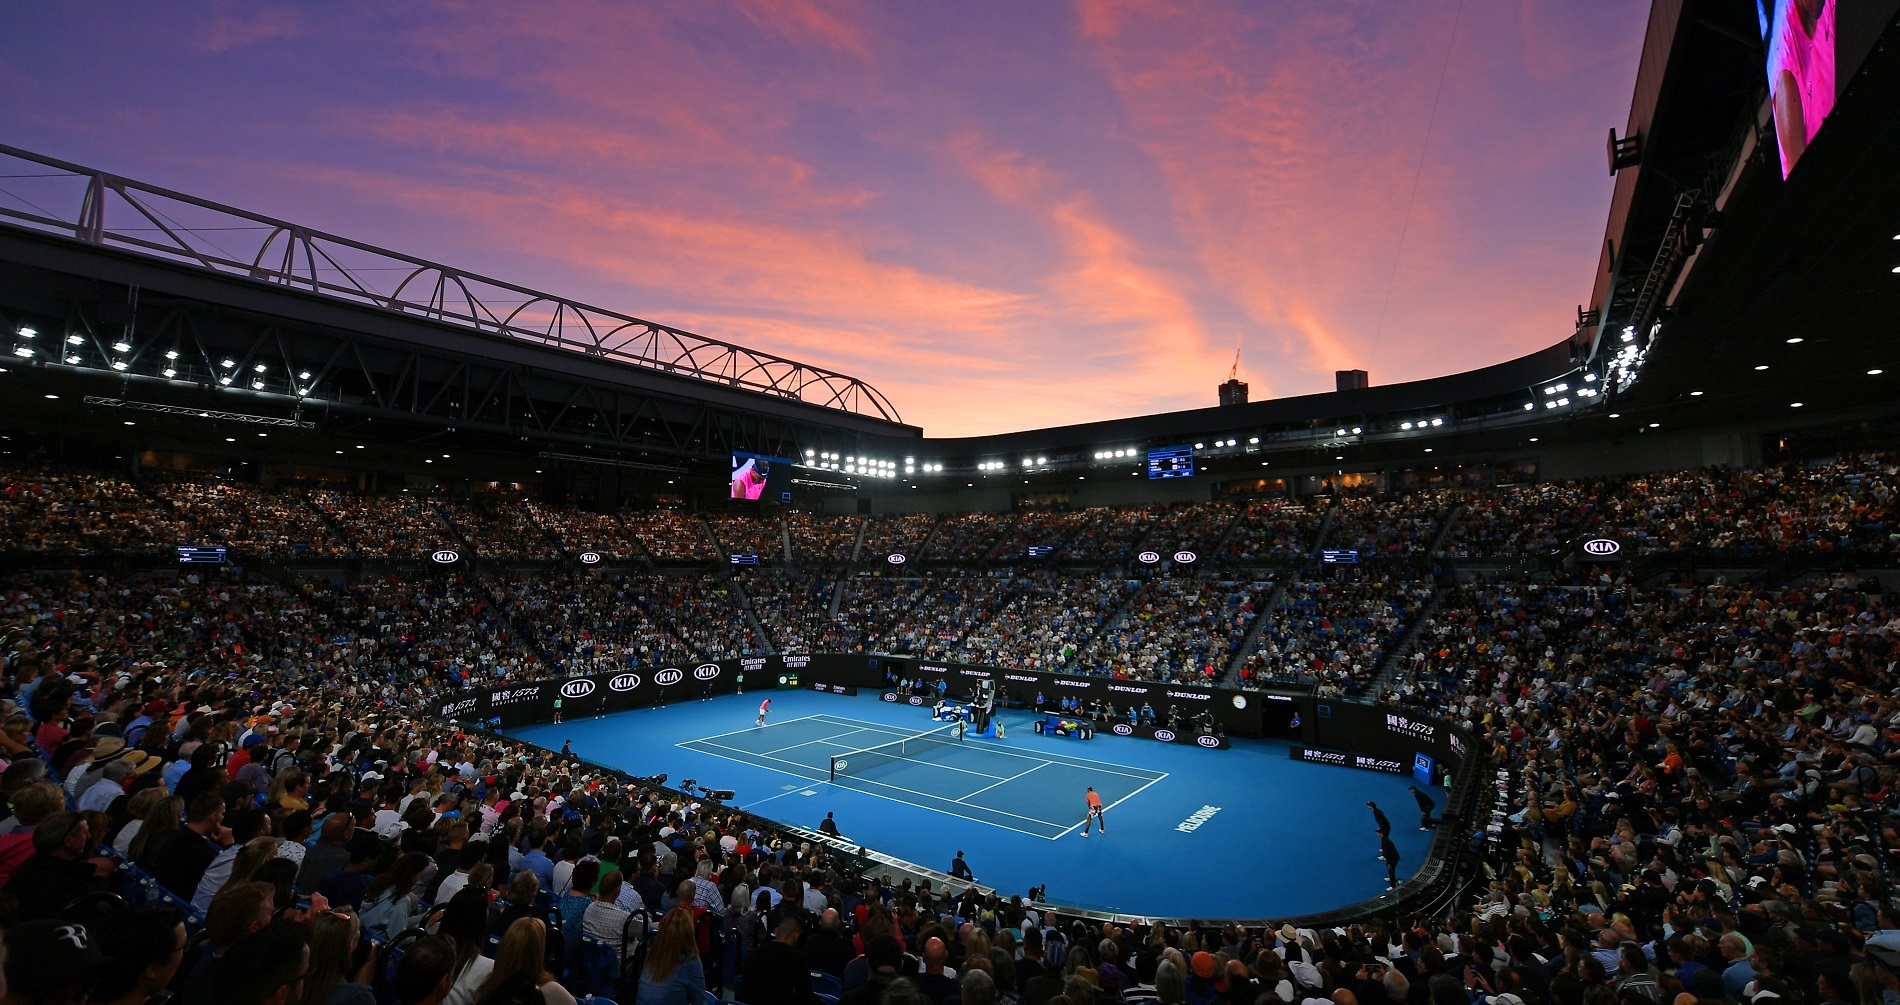 about the 2021 Australian Open - Tickets, schedule, TV broadcasts, prize money Tennis Majors